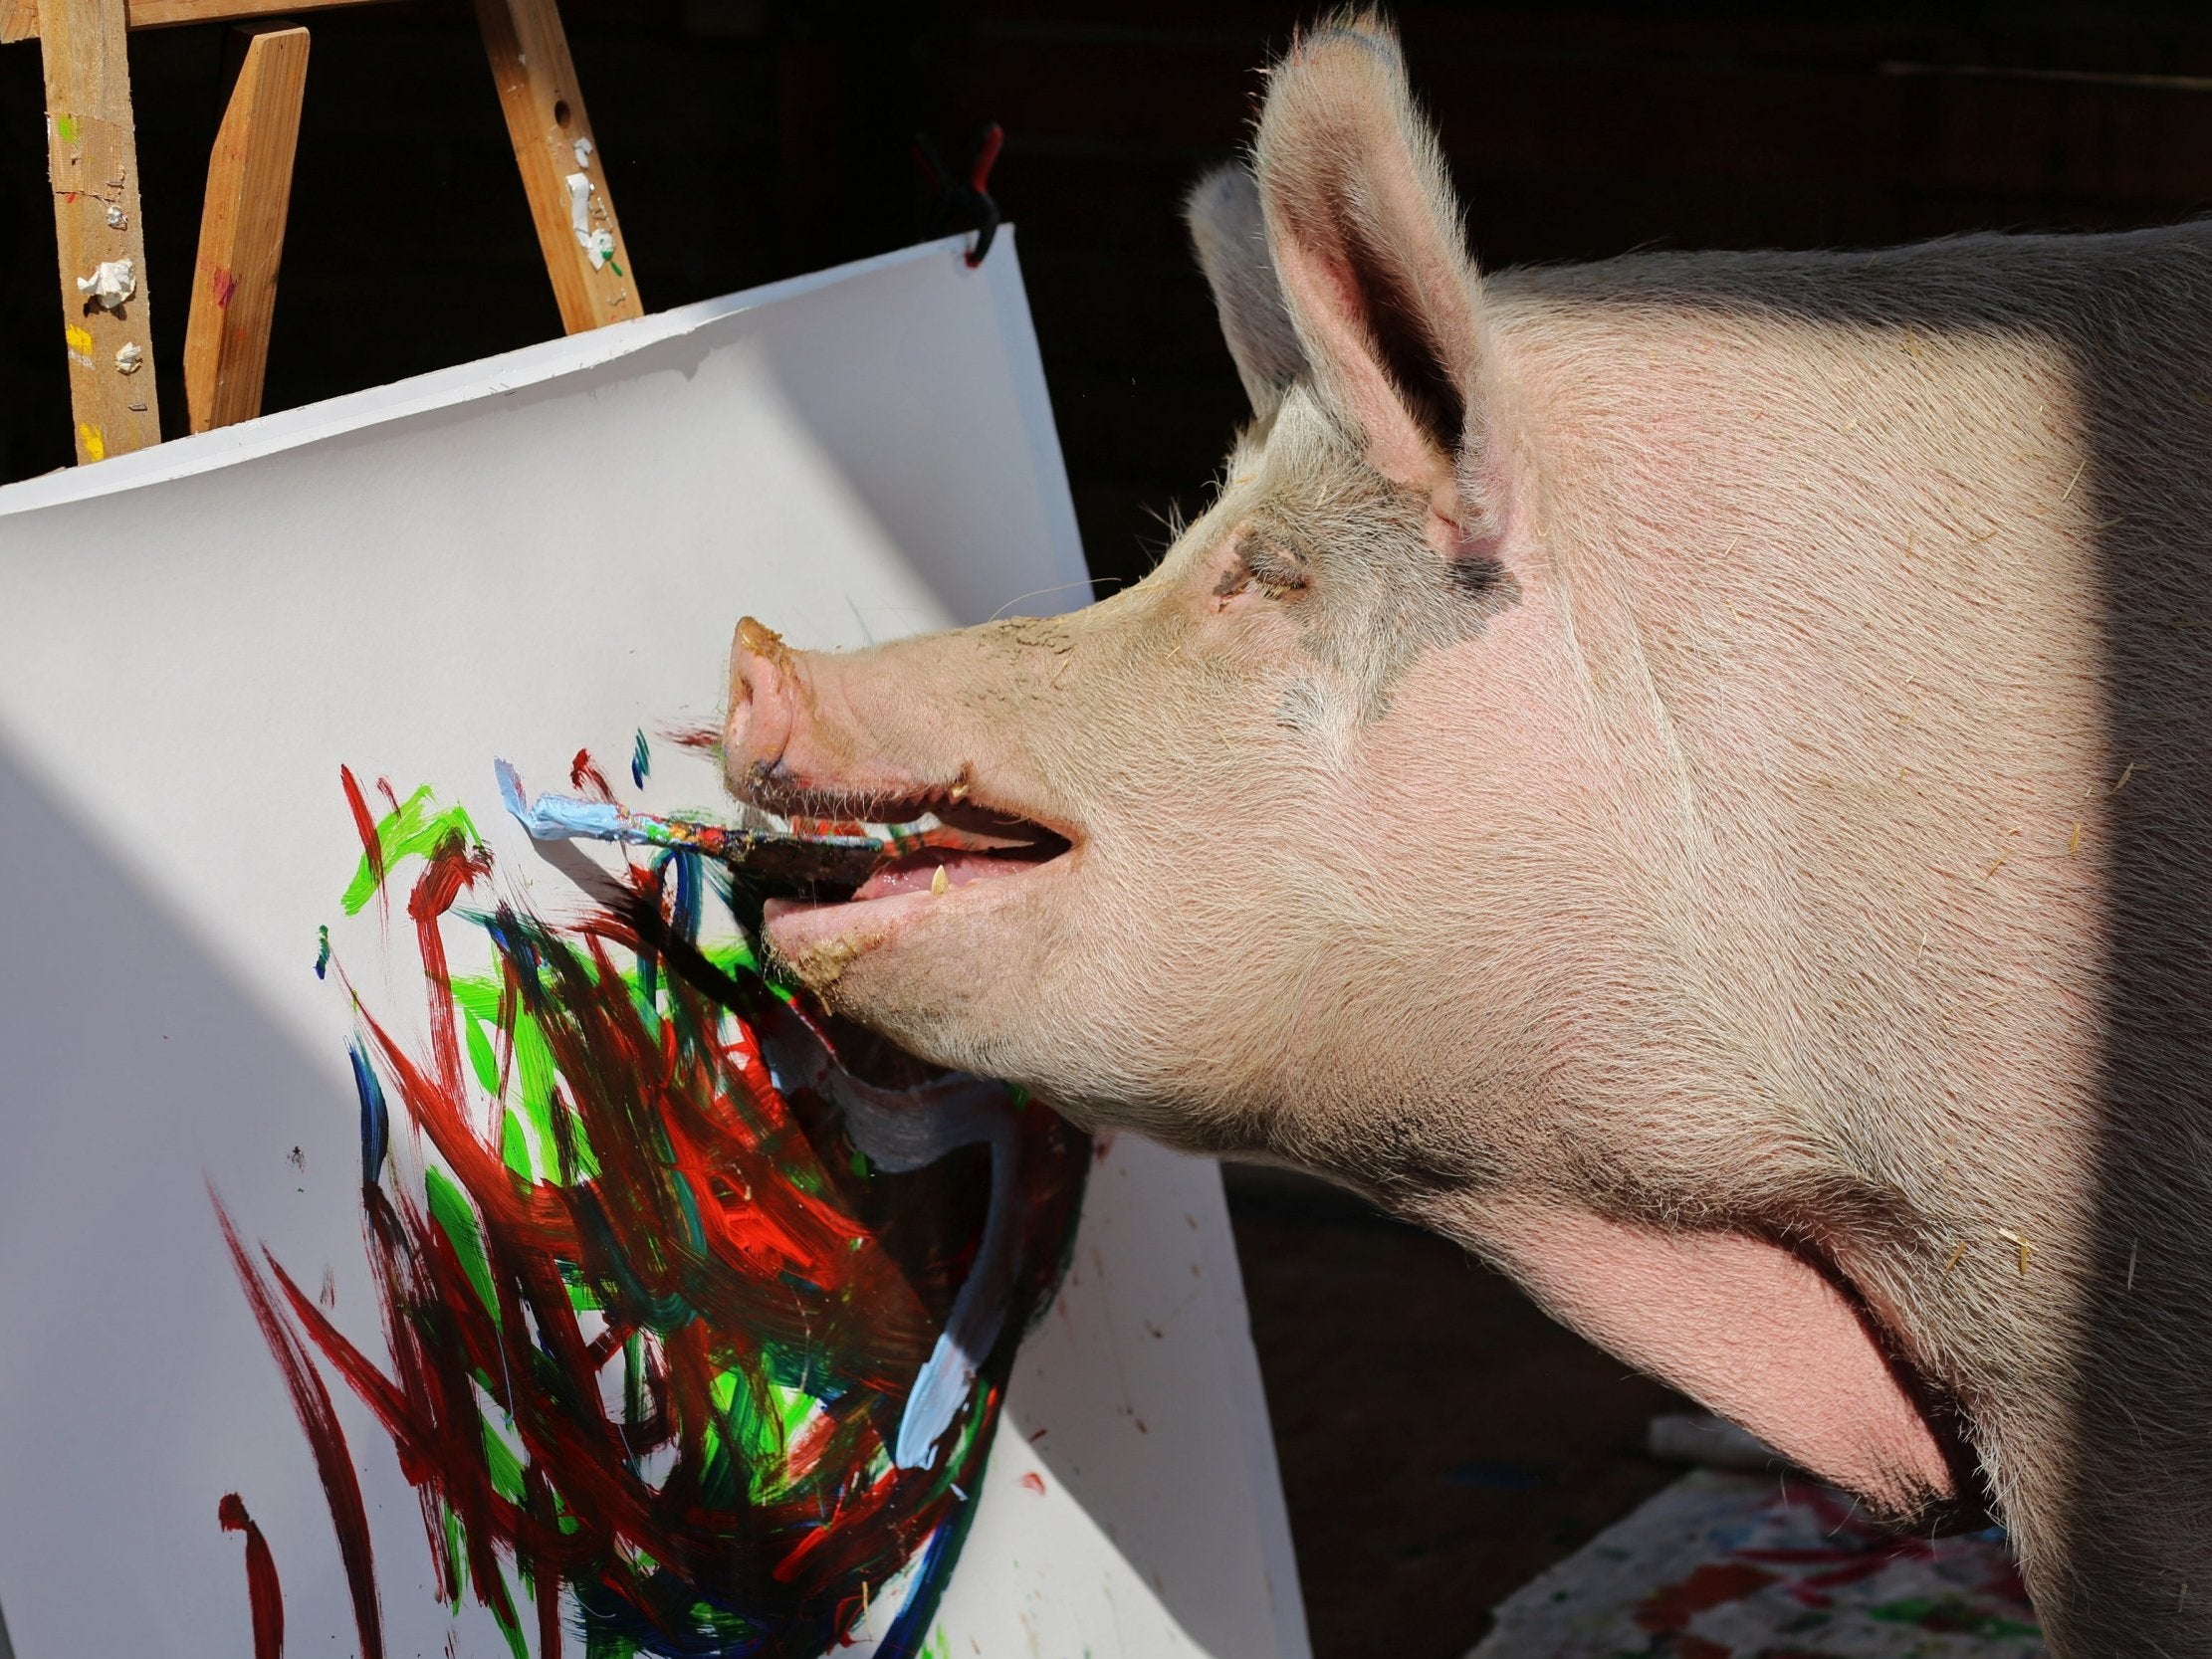 Pigcasso, a rescued pig, paints on a canvas at the Farm Sanctuary in Franschhoek, outside Cape Town, South Africa.